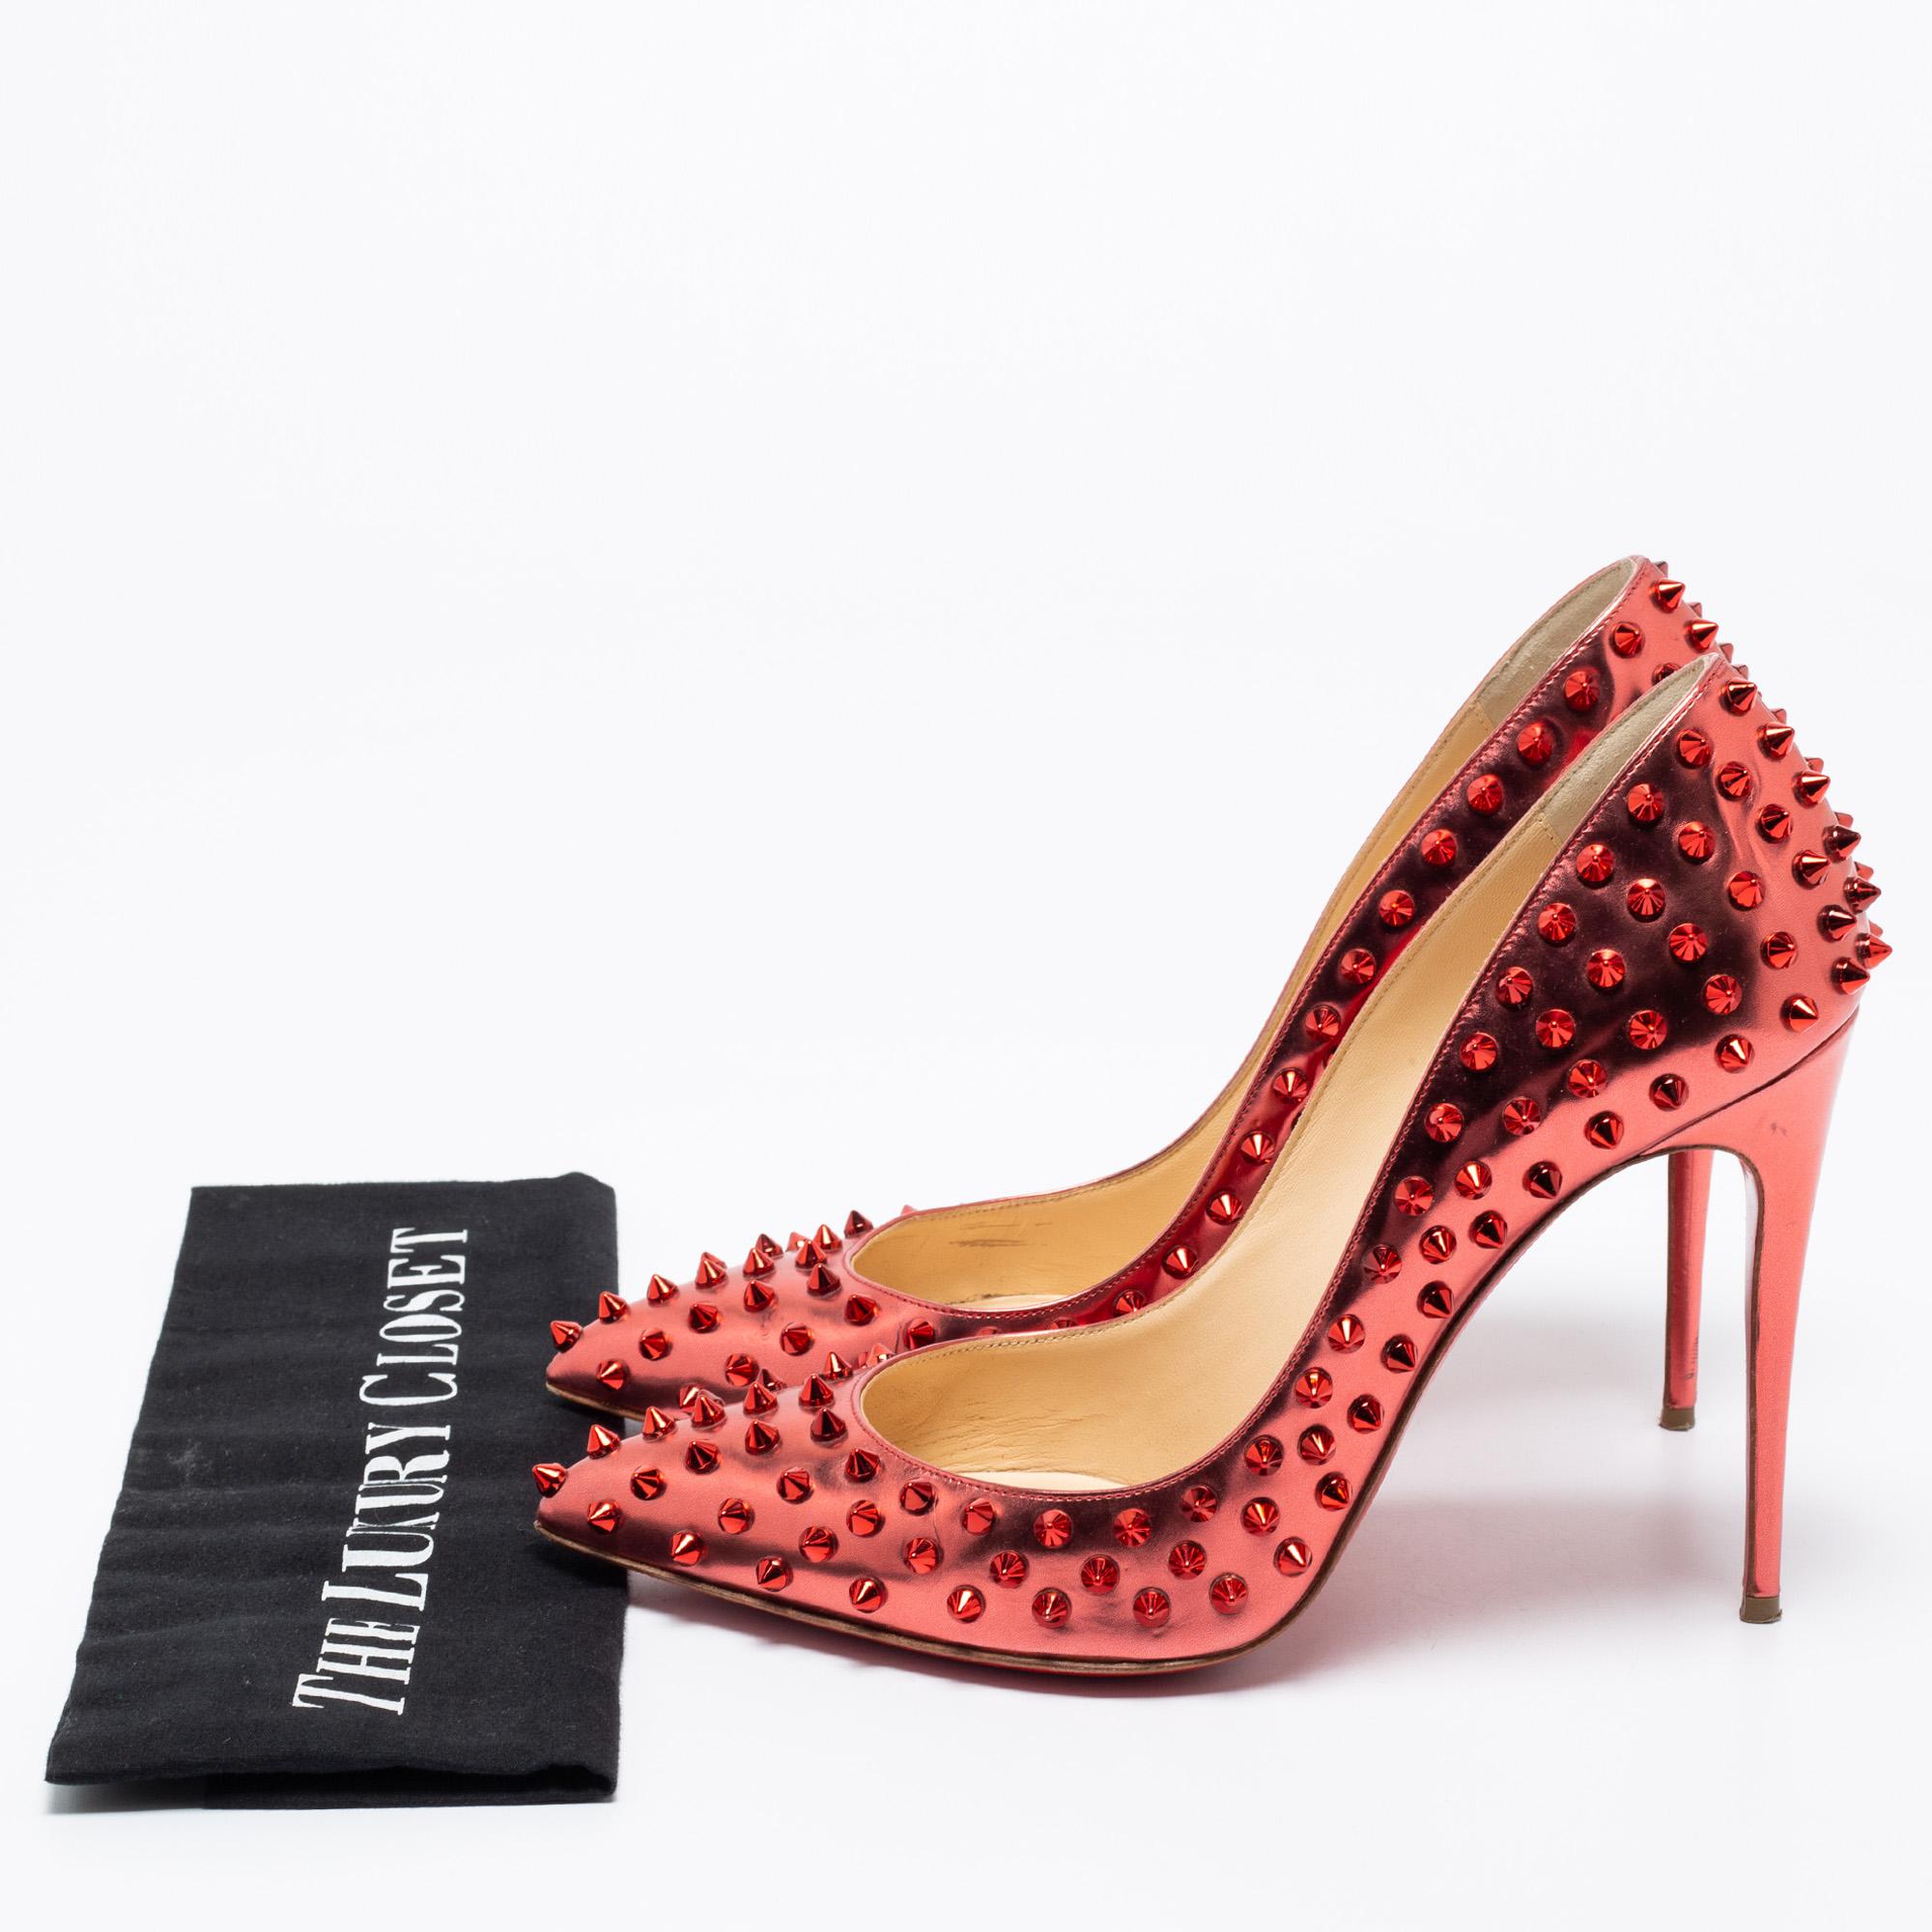 Christian Louboutin Metallic Red Leather Pigalle Spikes Pumps Size 41 4